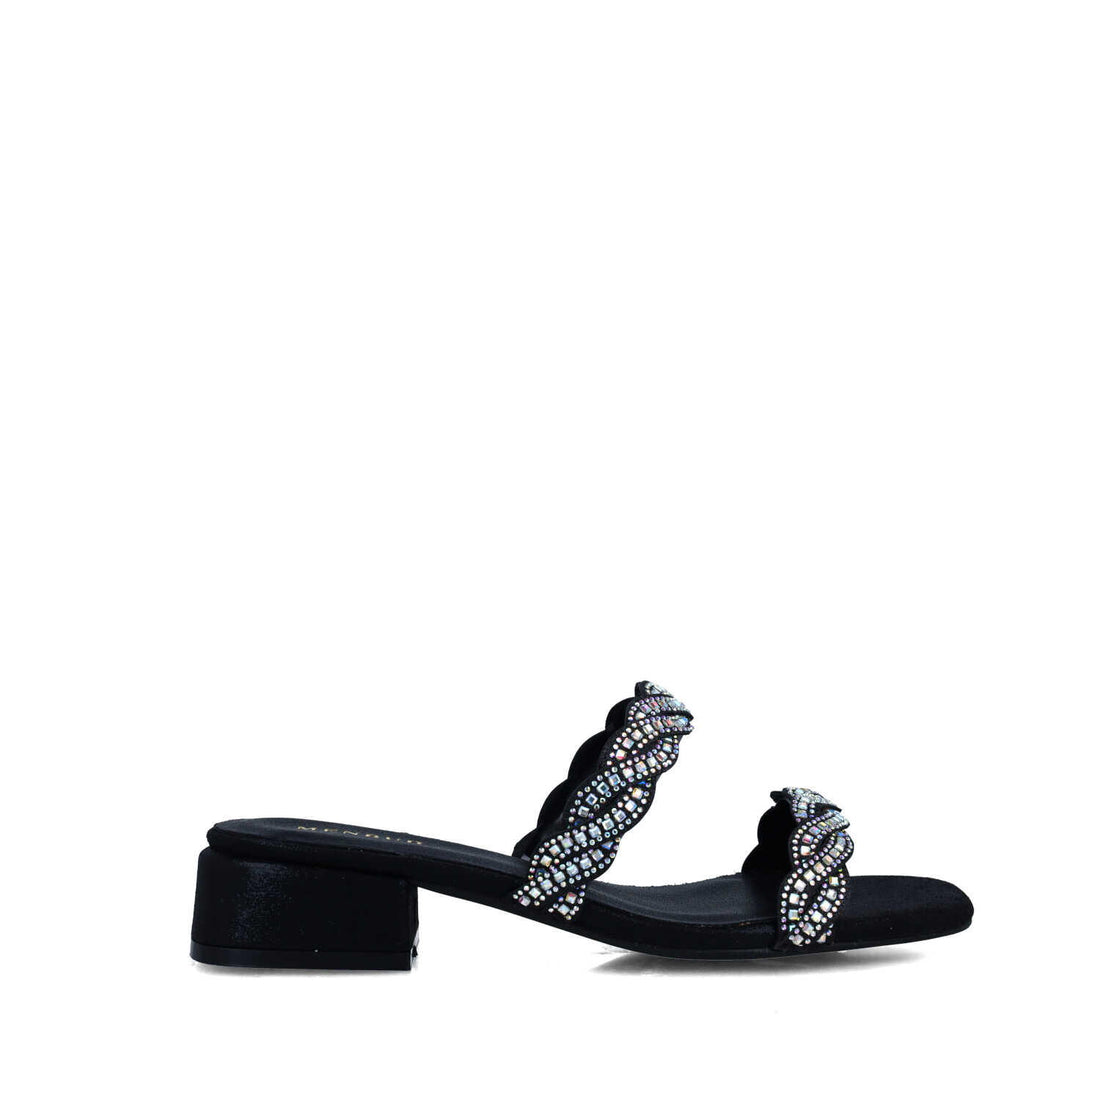 Black Slippers With Heel_24927_01_01